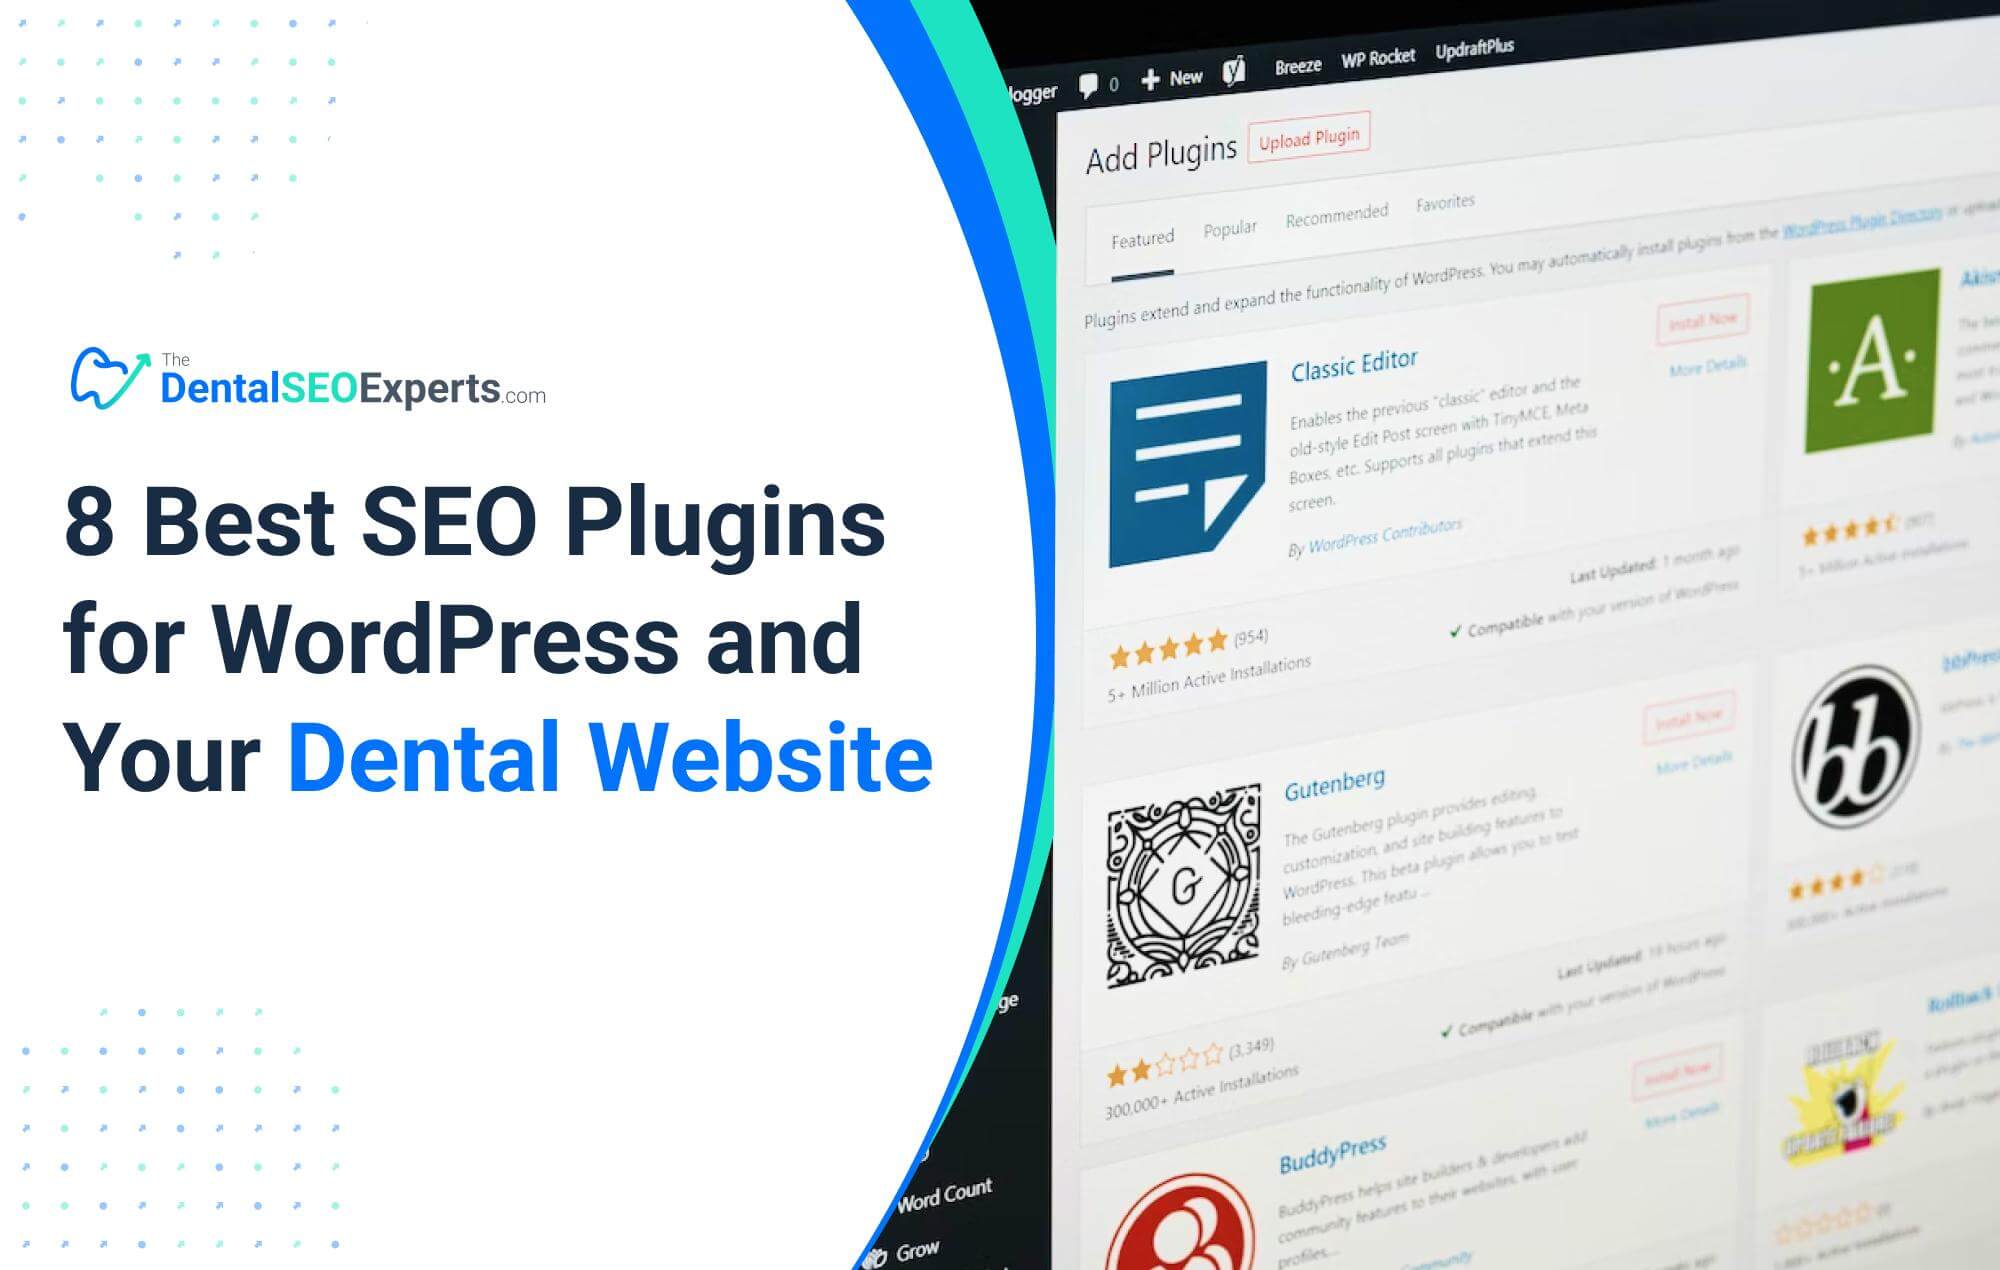 8 Best SEO Plugins for WordPress and Your Dental Website